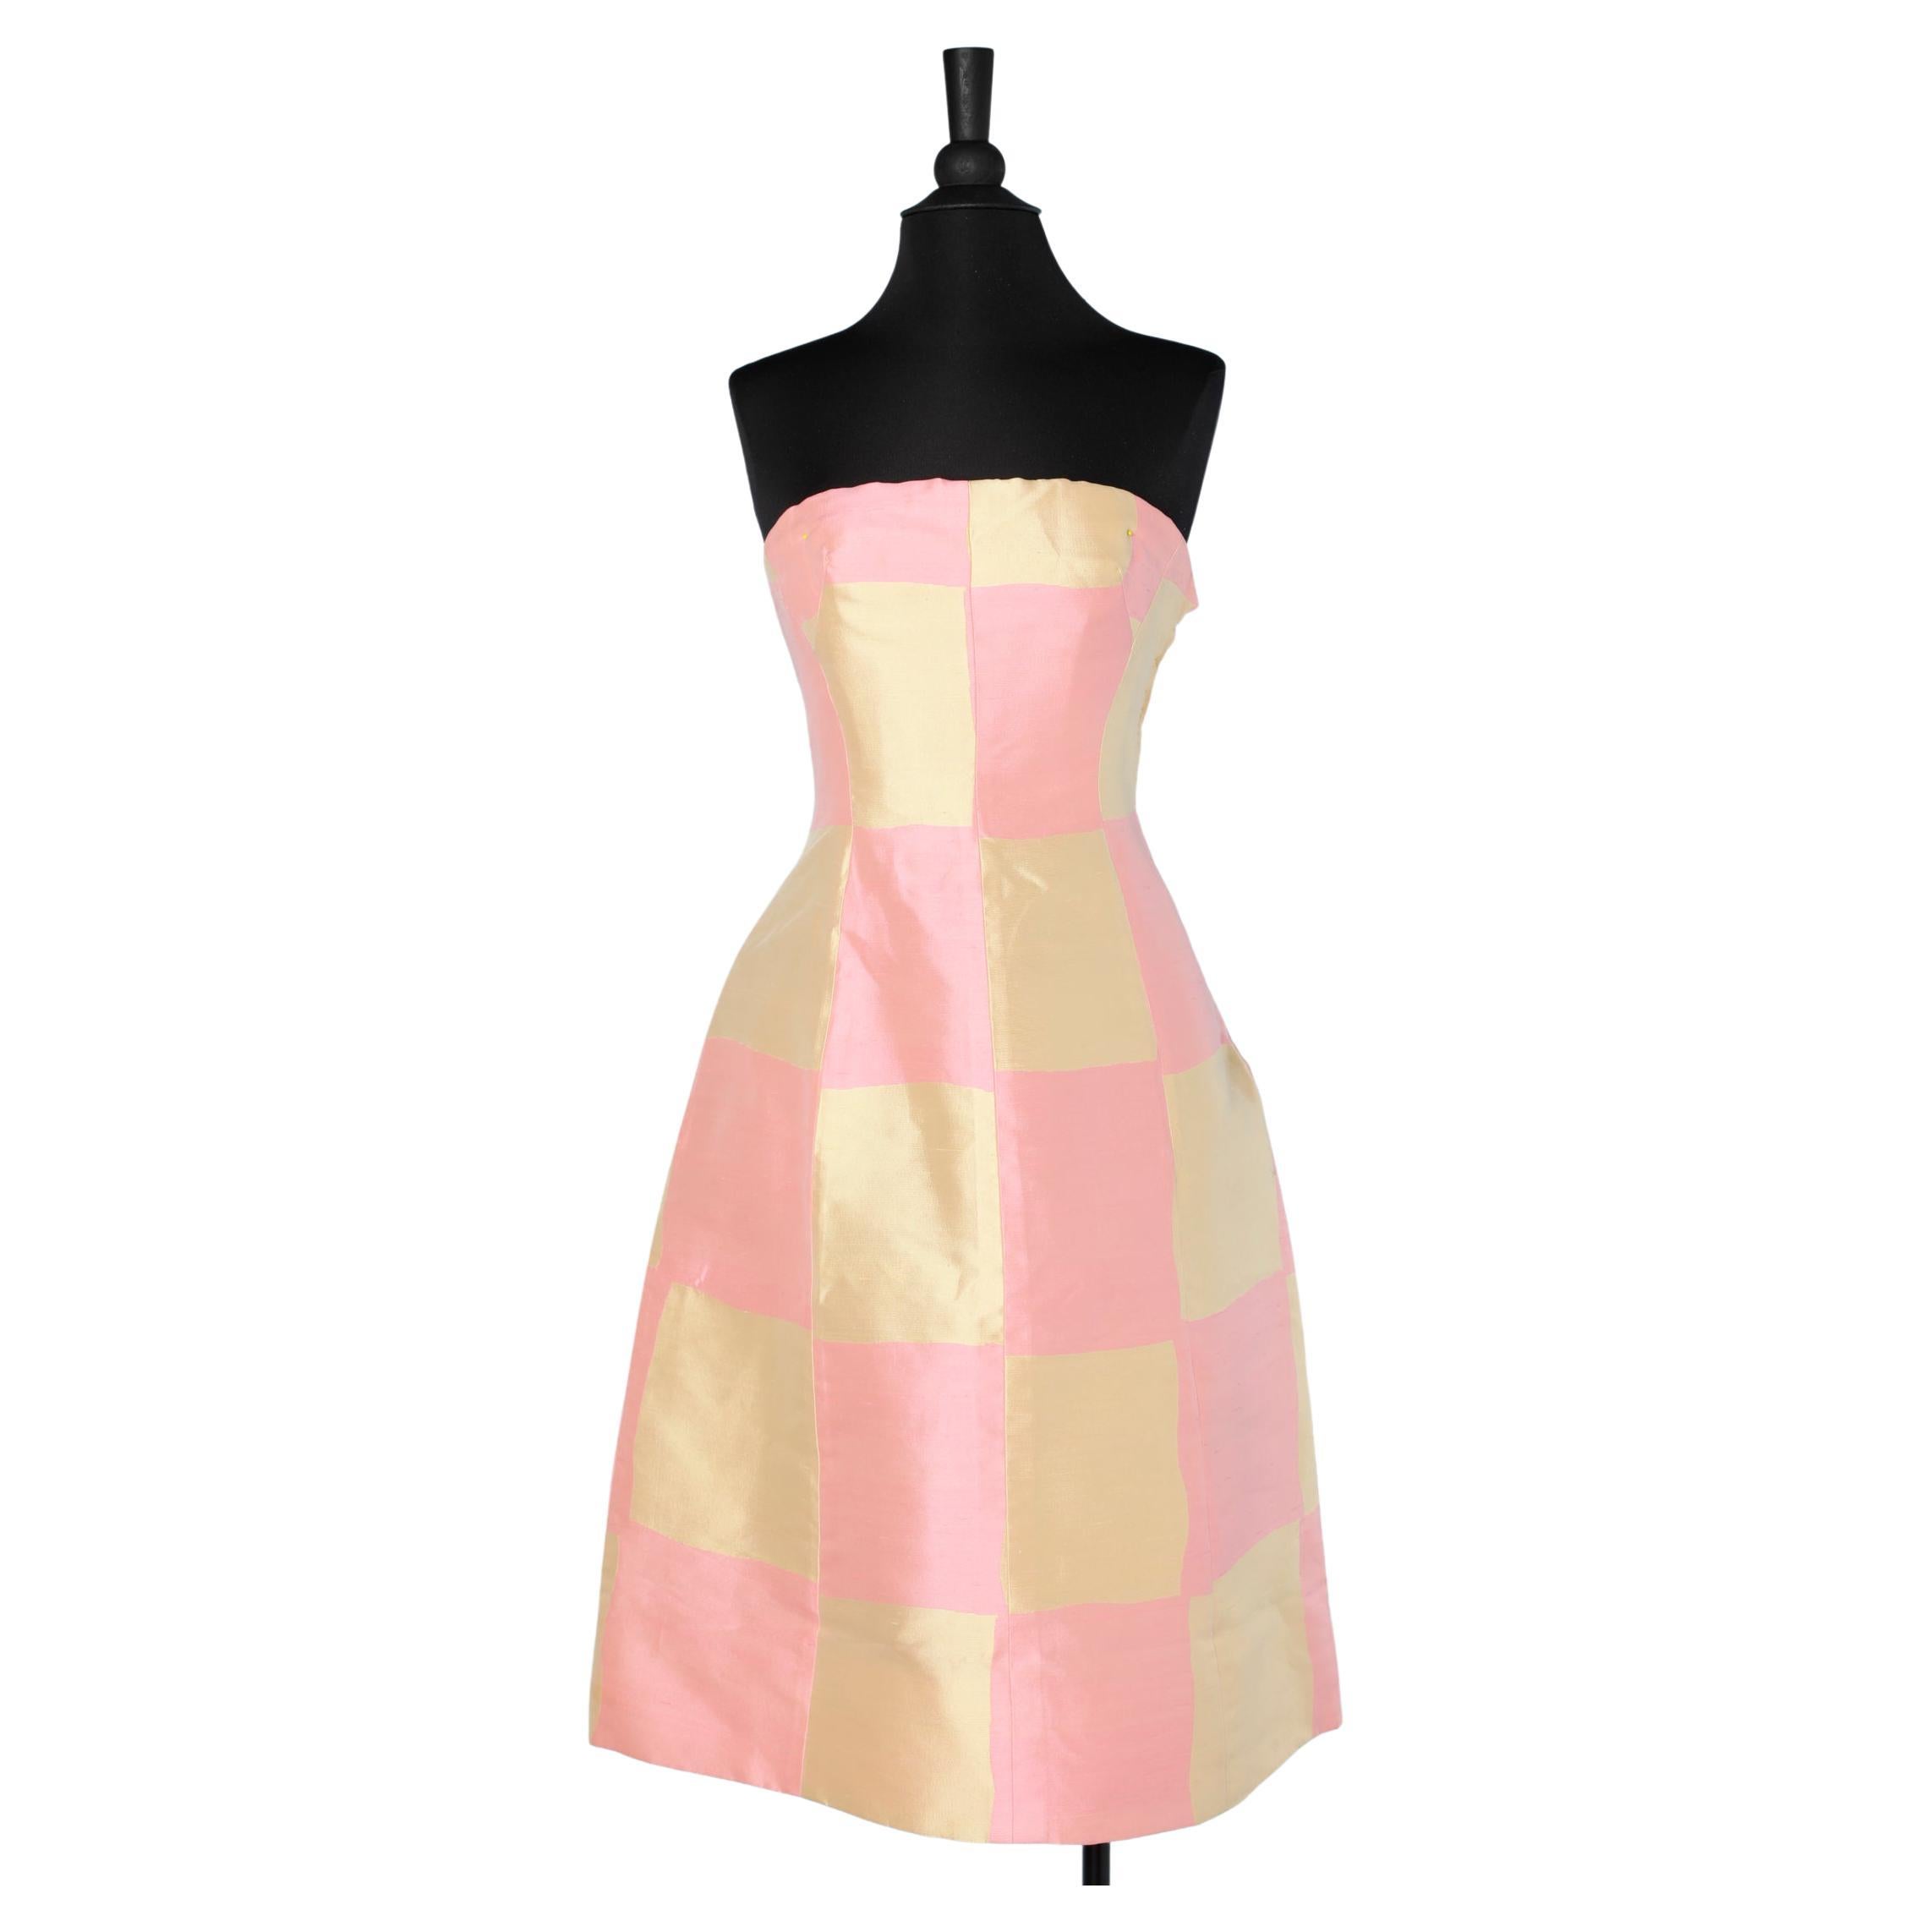 Pastel pink and yellow bustier dress in shantung Jacques Fath 